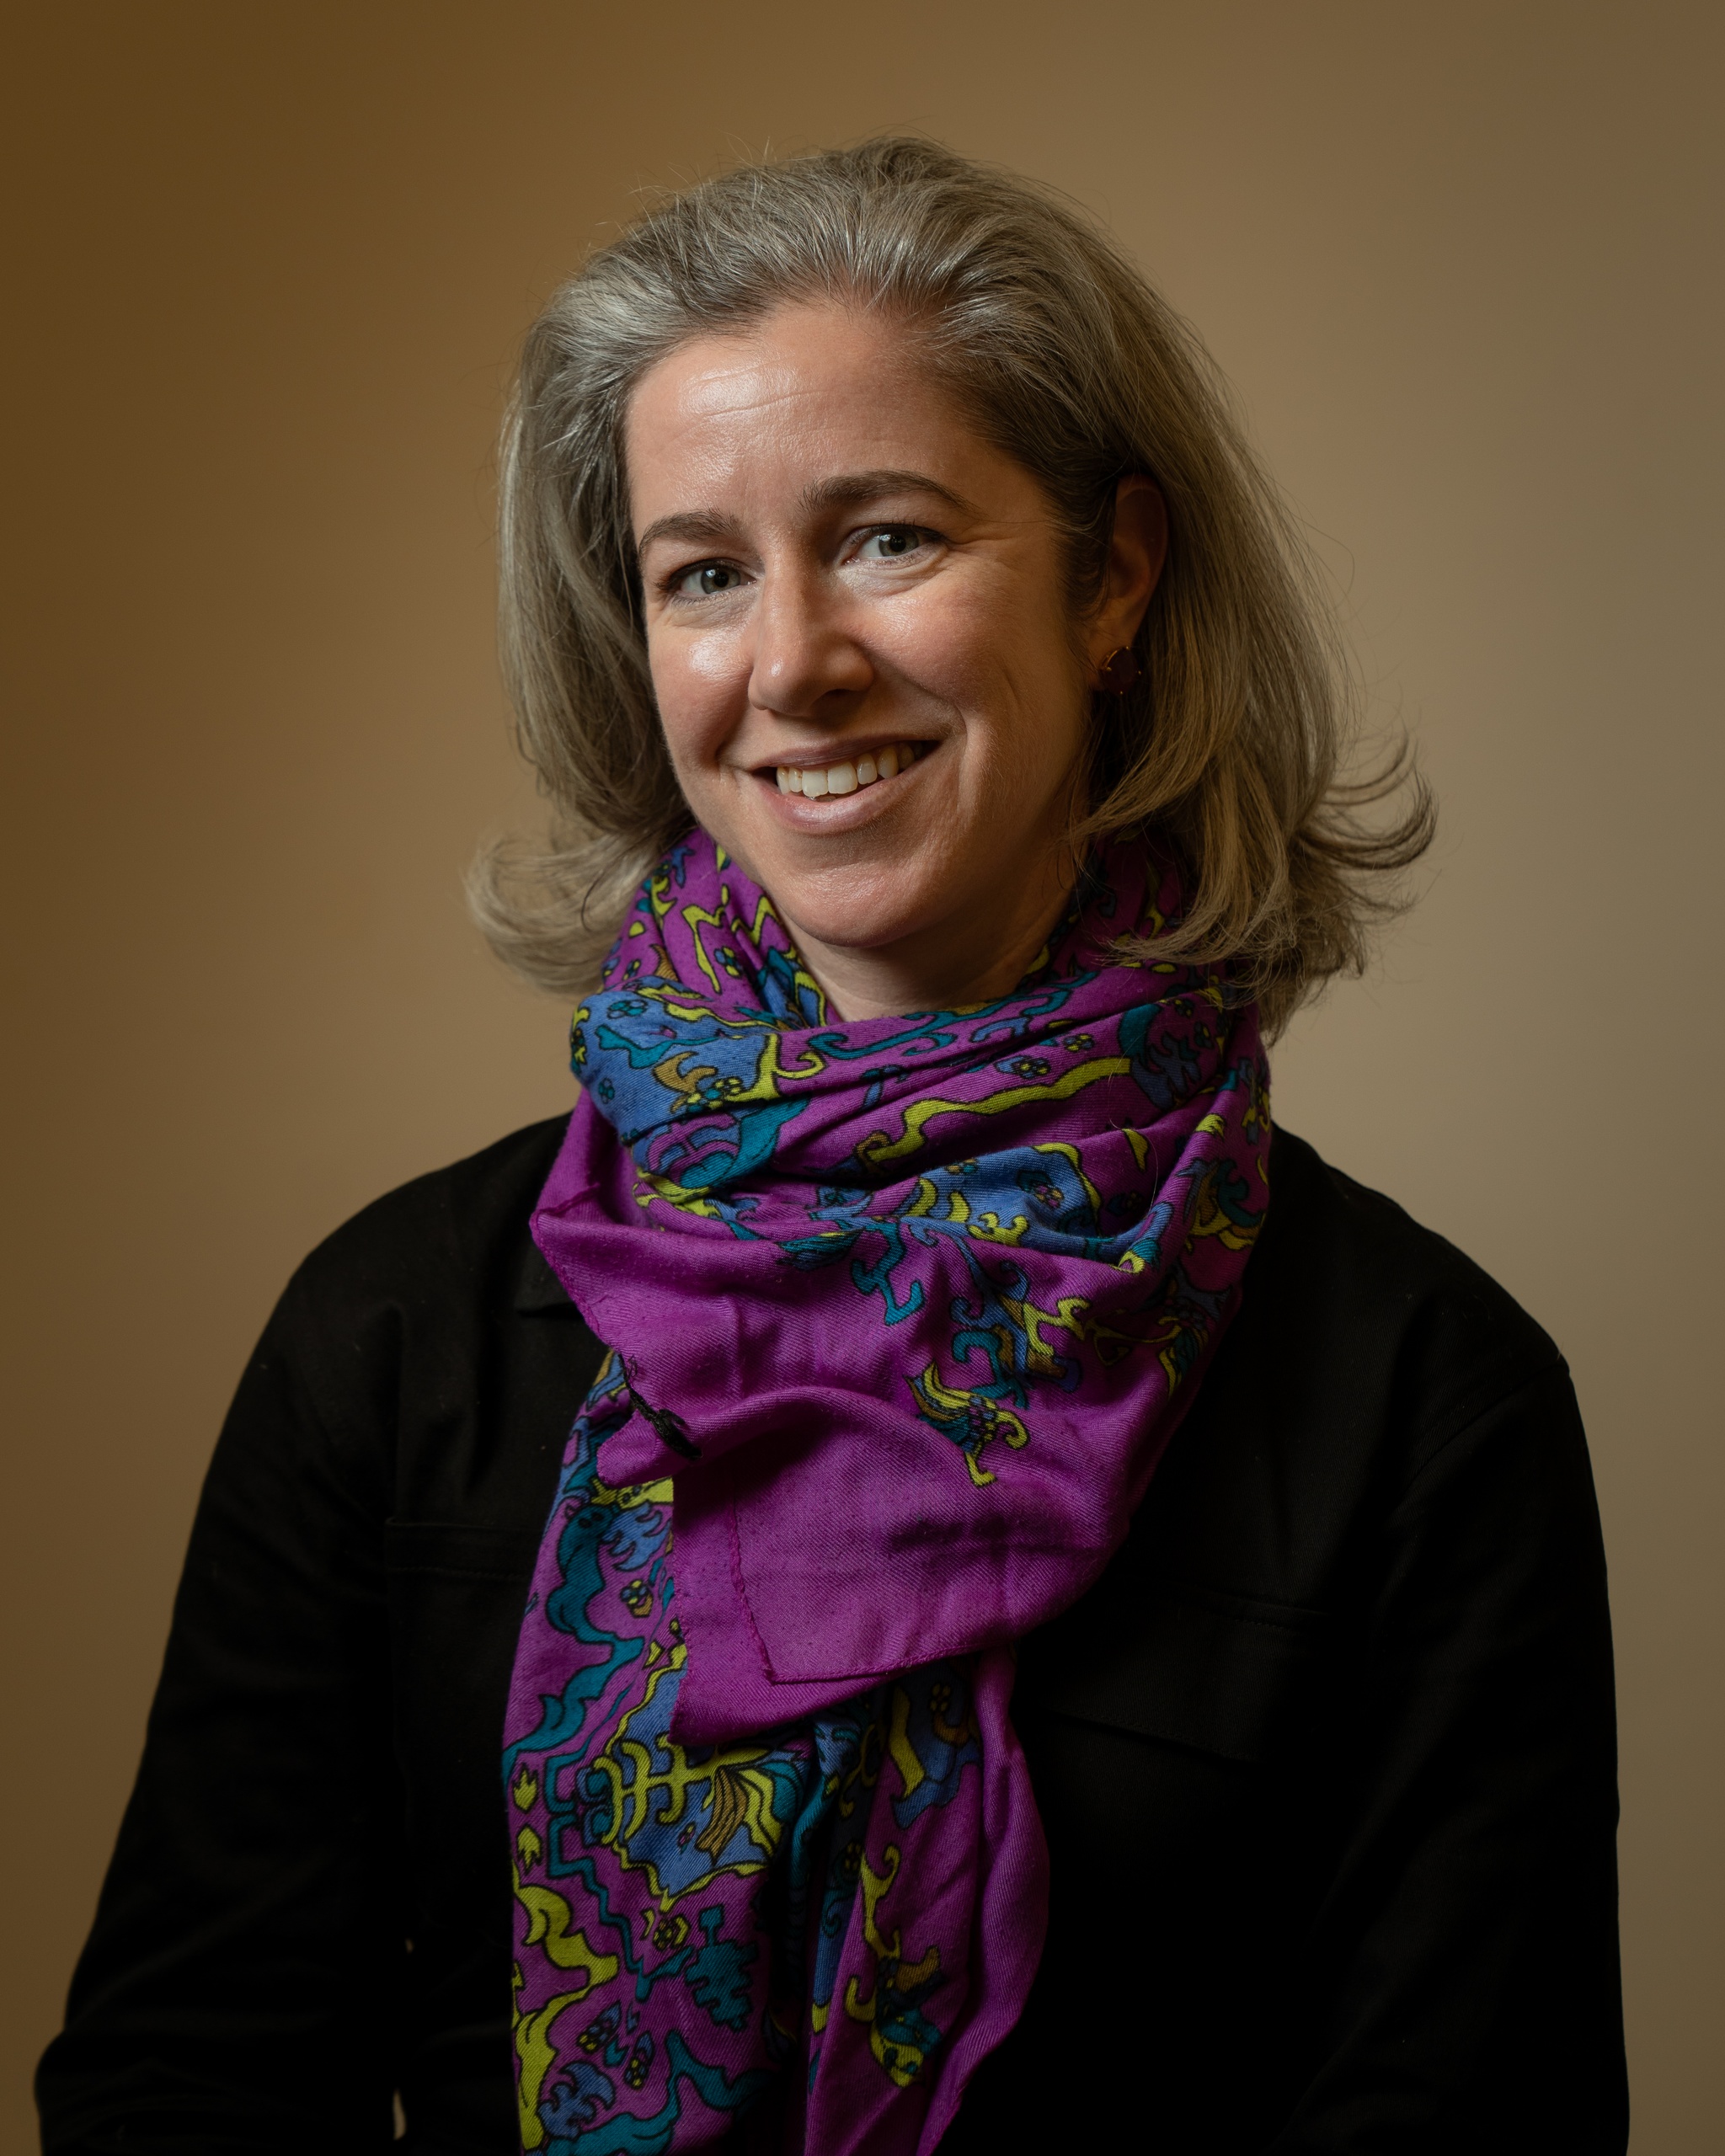 A portrait of Andrea Salvatore against a neutral brown background. Andrea has neck-length silvery gray hair and smiles broadly at us. She wears a voluminous scarf that is deep purple and blue. 